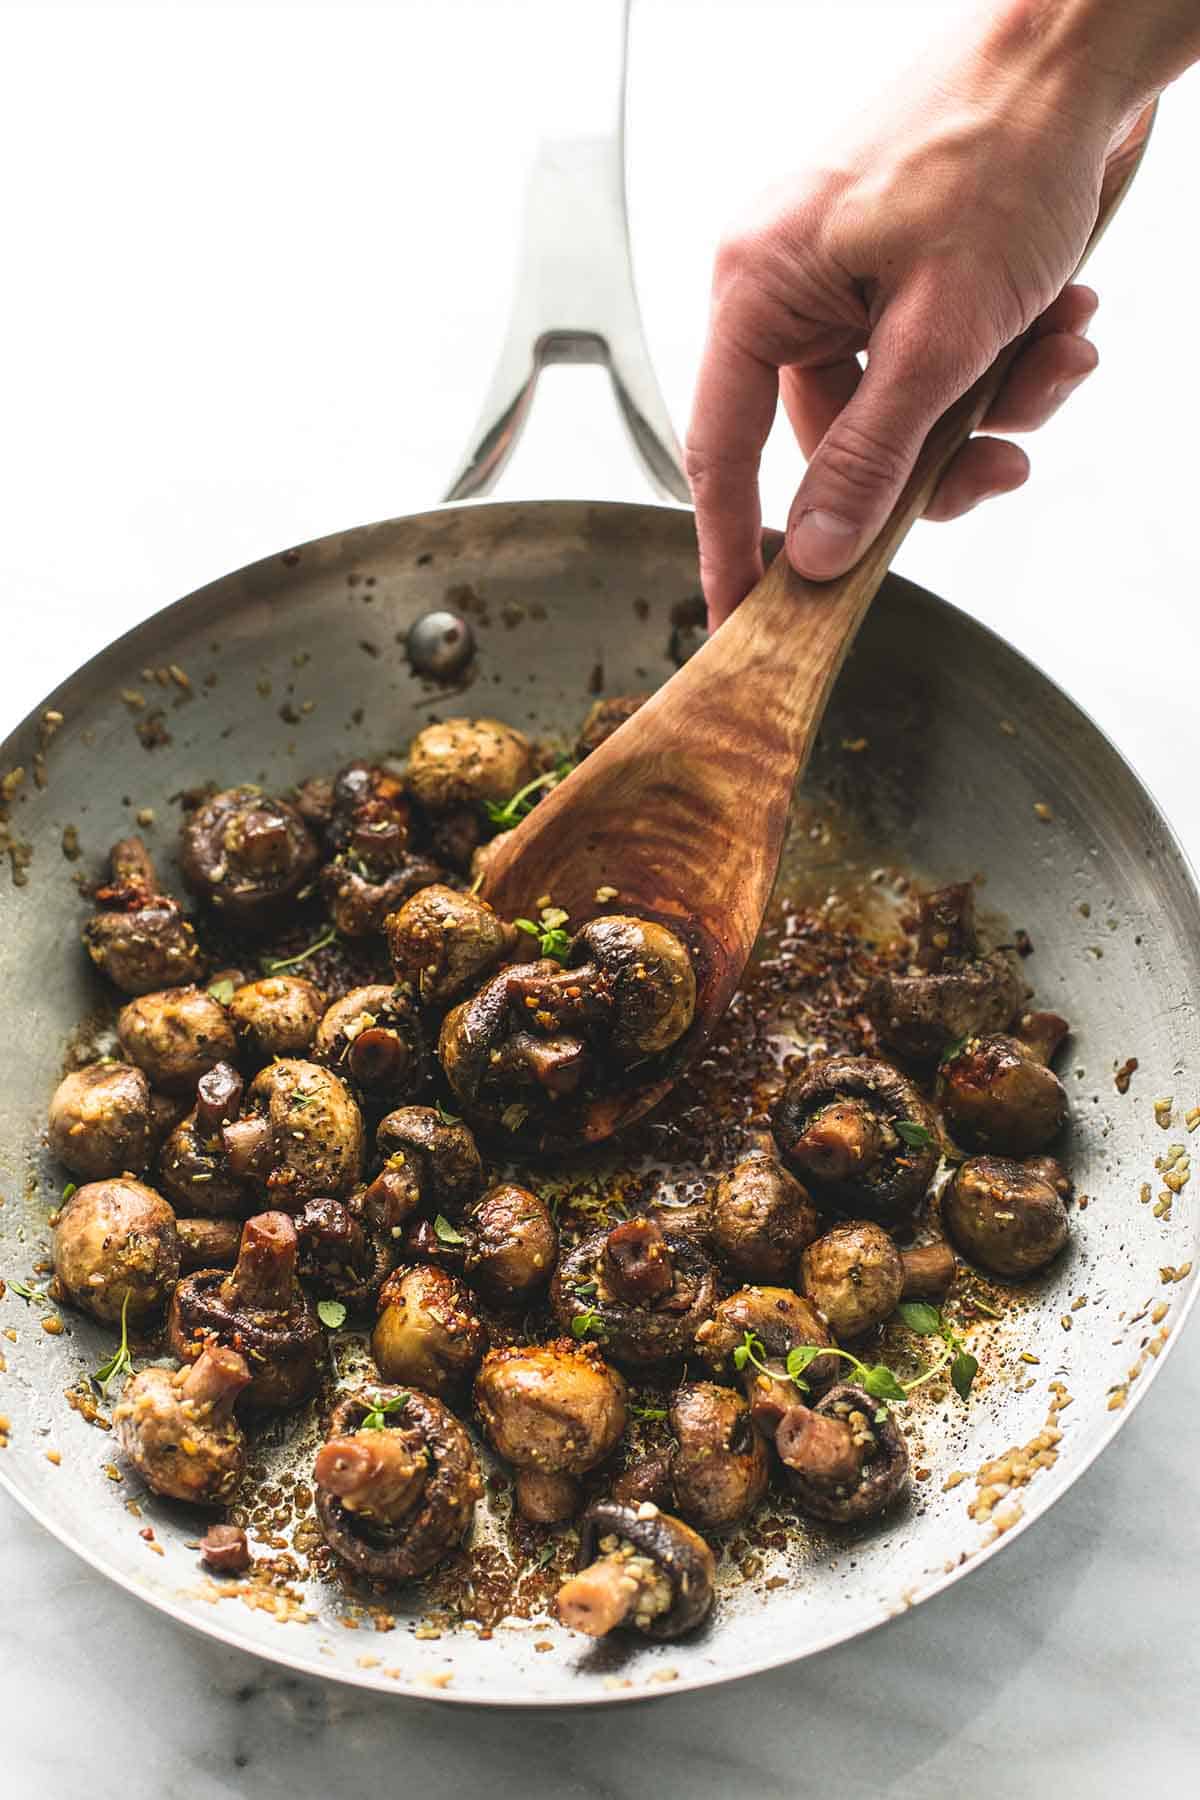 a hand grabbing some sautéed garlic butter mushrooms with a wooden serving spoon from a skillet.